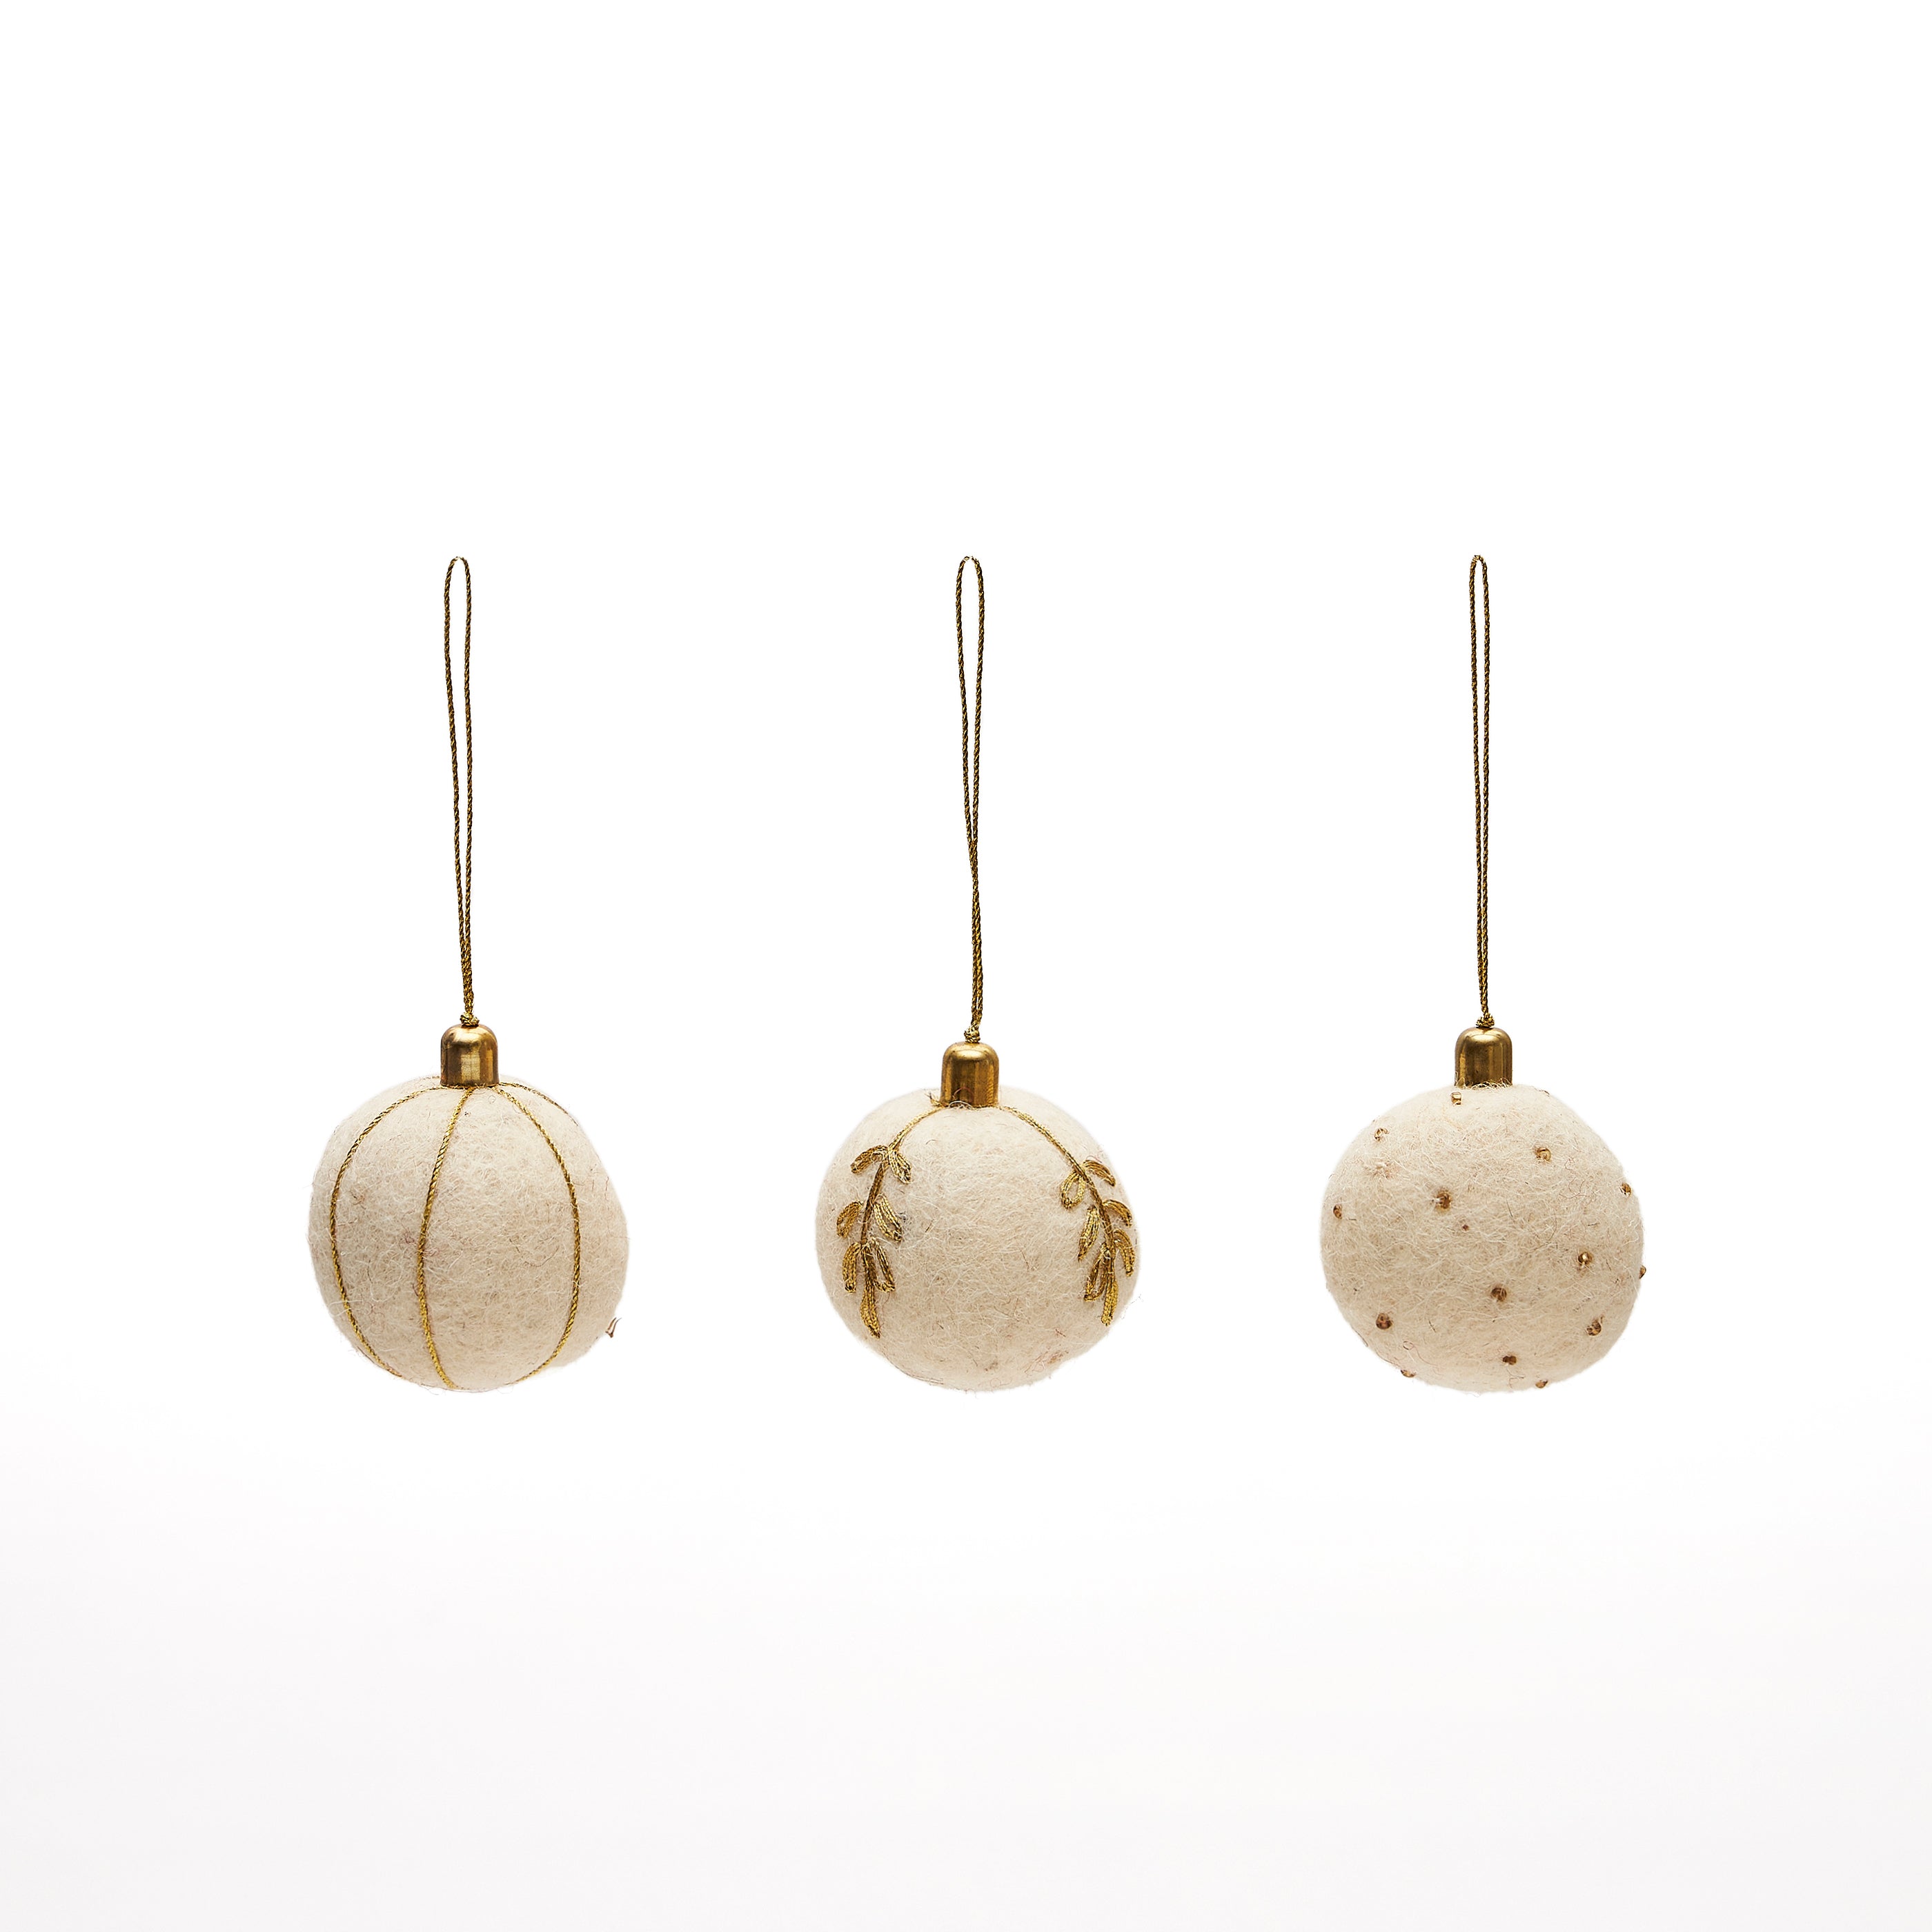 Breshi set of 3 small white decorative pendant balls with gold details 